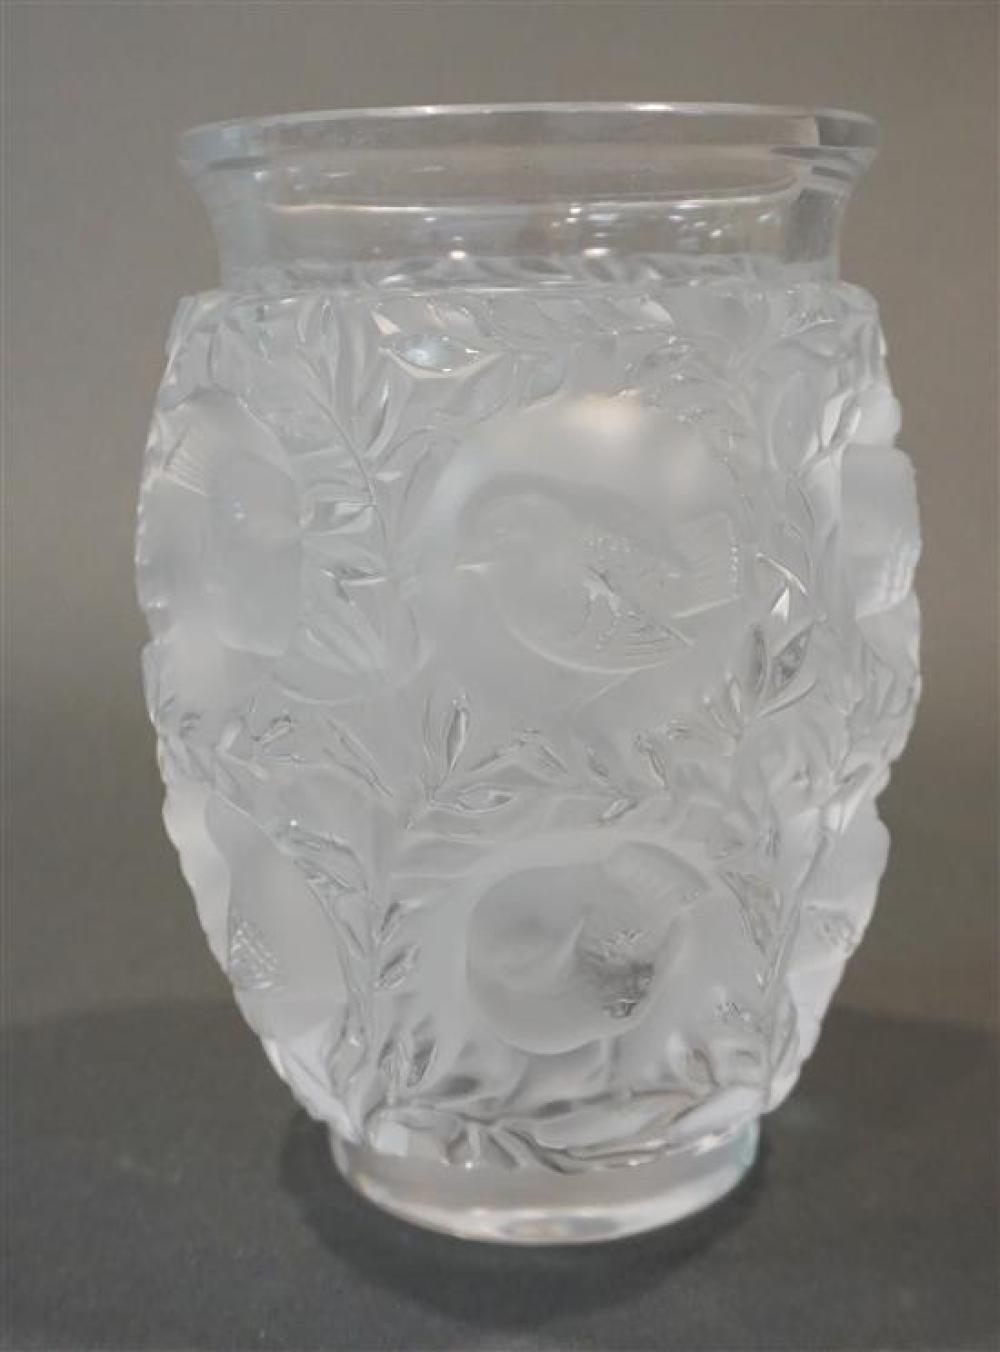 LALIQUE FROSTED GLASS BAGATELLE  321a53